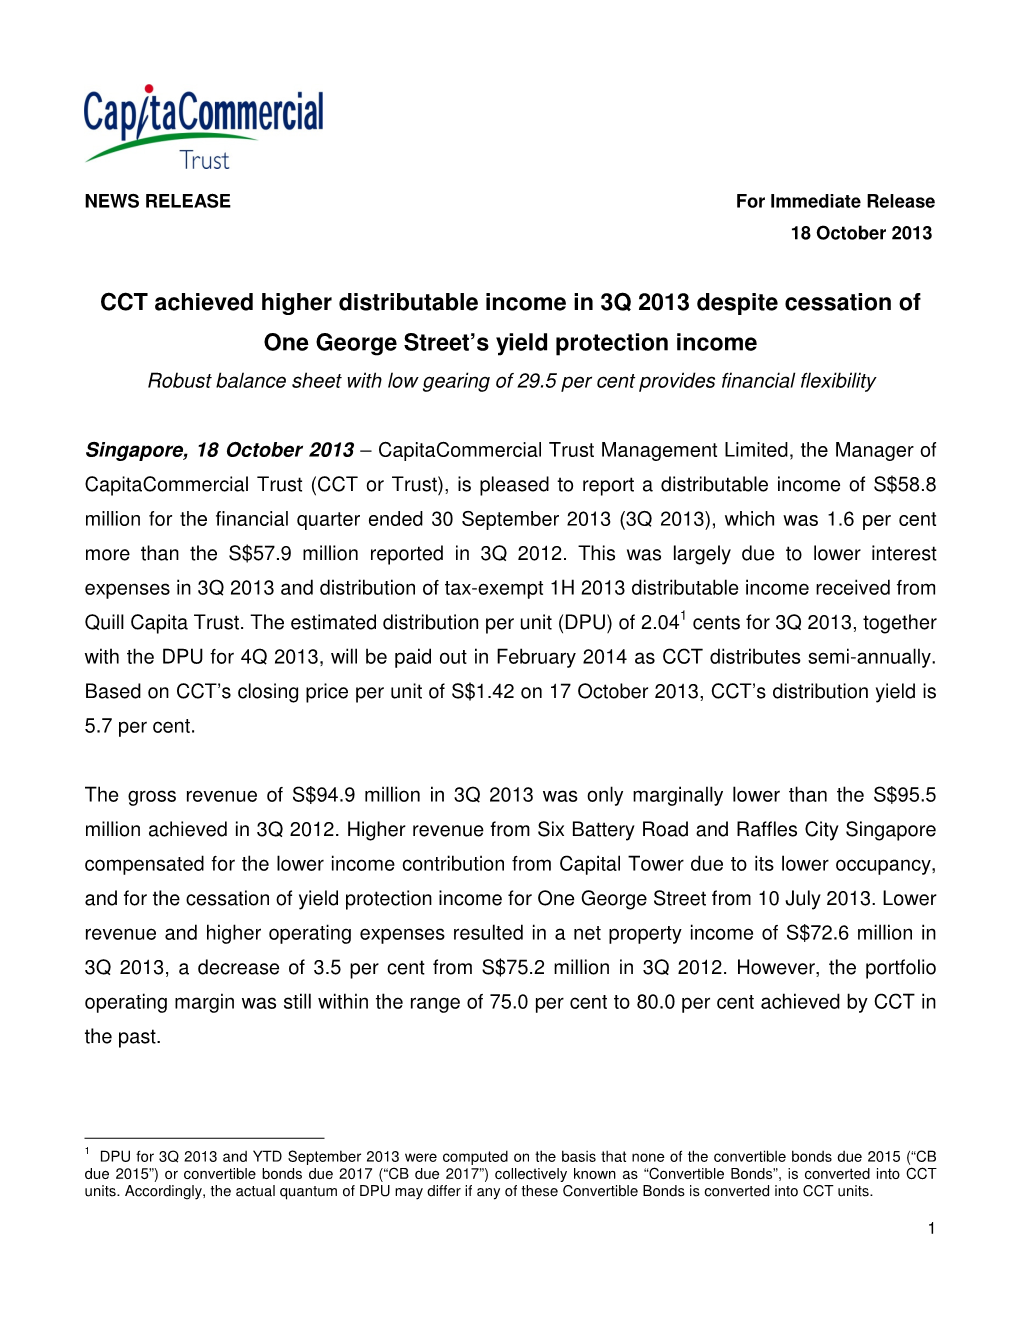 CCT Achieved Higher Distributable Income in 3Q 2013 Despite Cessation of One George Street's Yield Protection Income